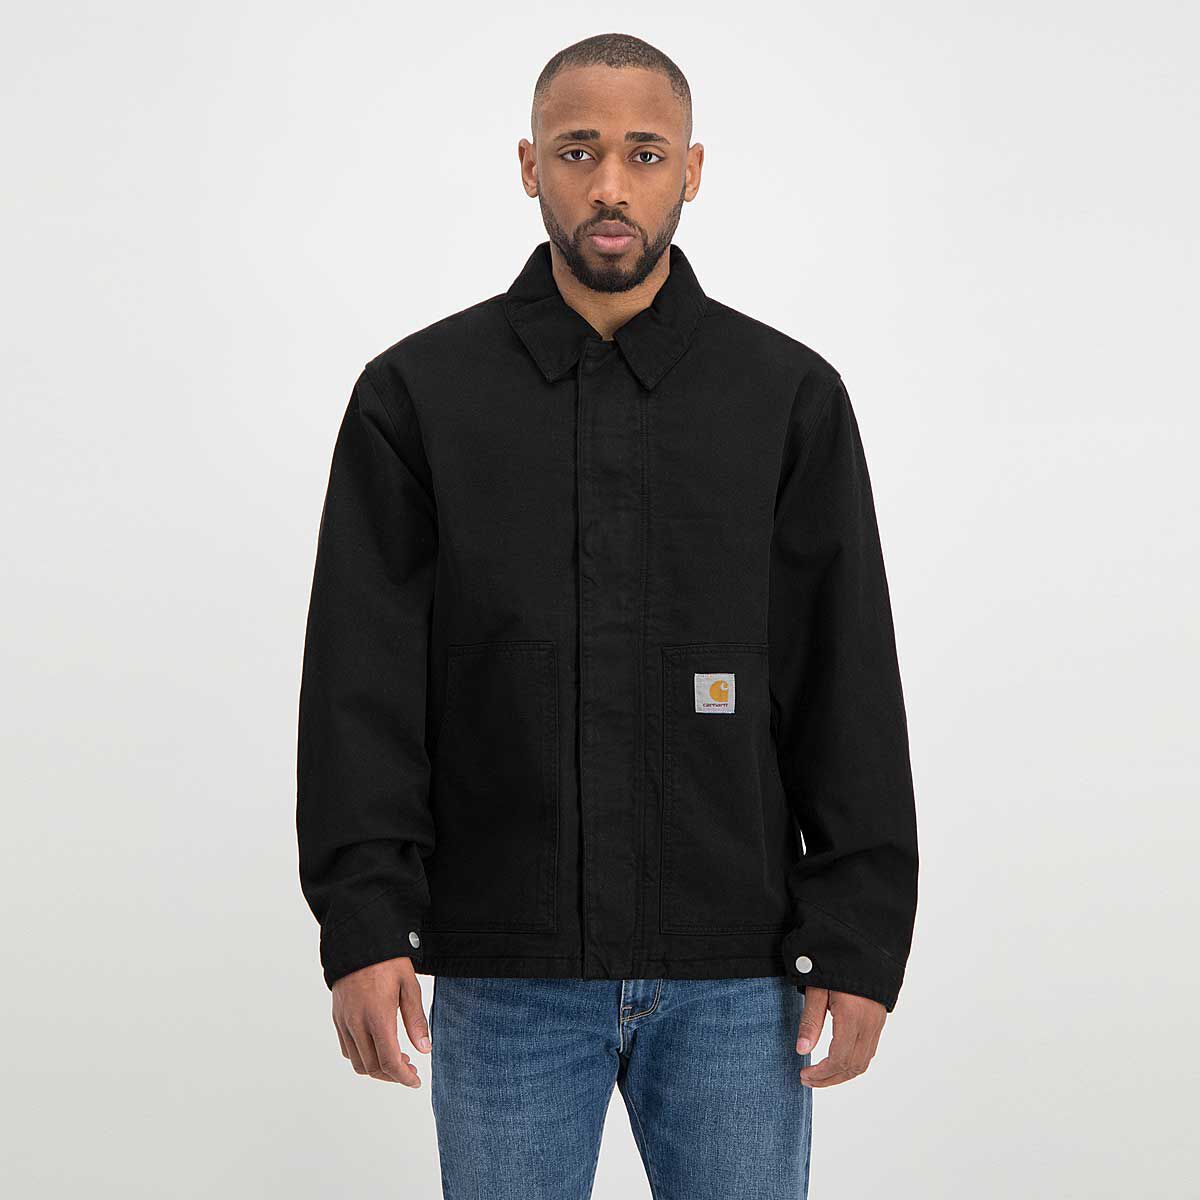 Buy Arcan Jacket for N/A 0.0 on KICKZ.com!